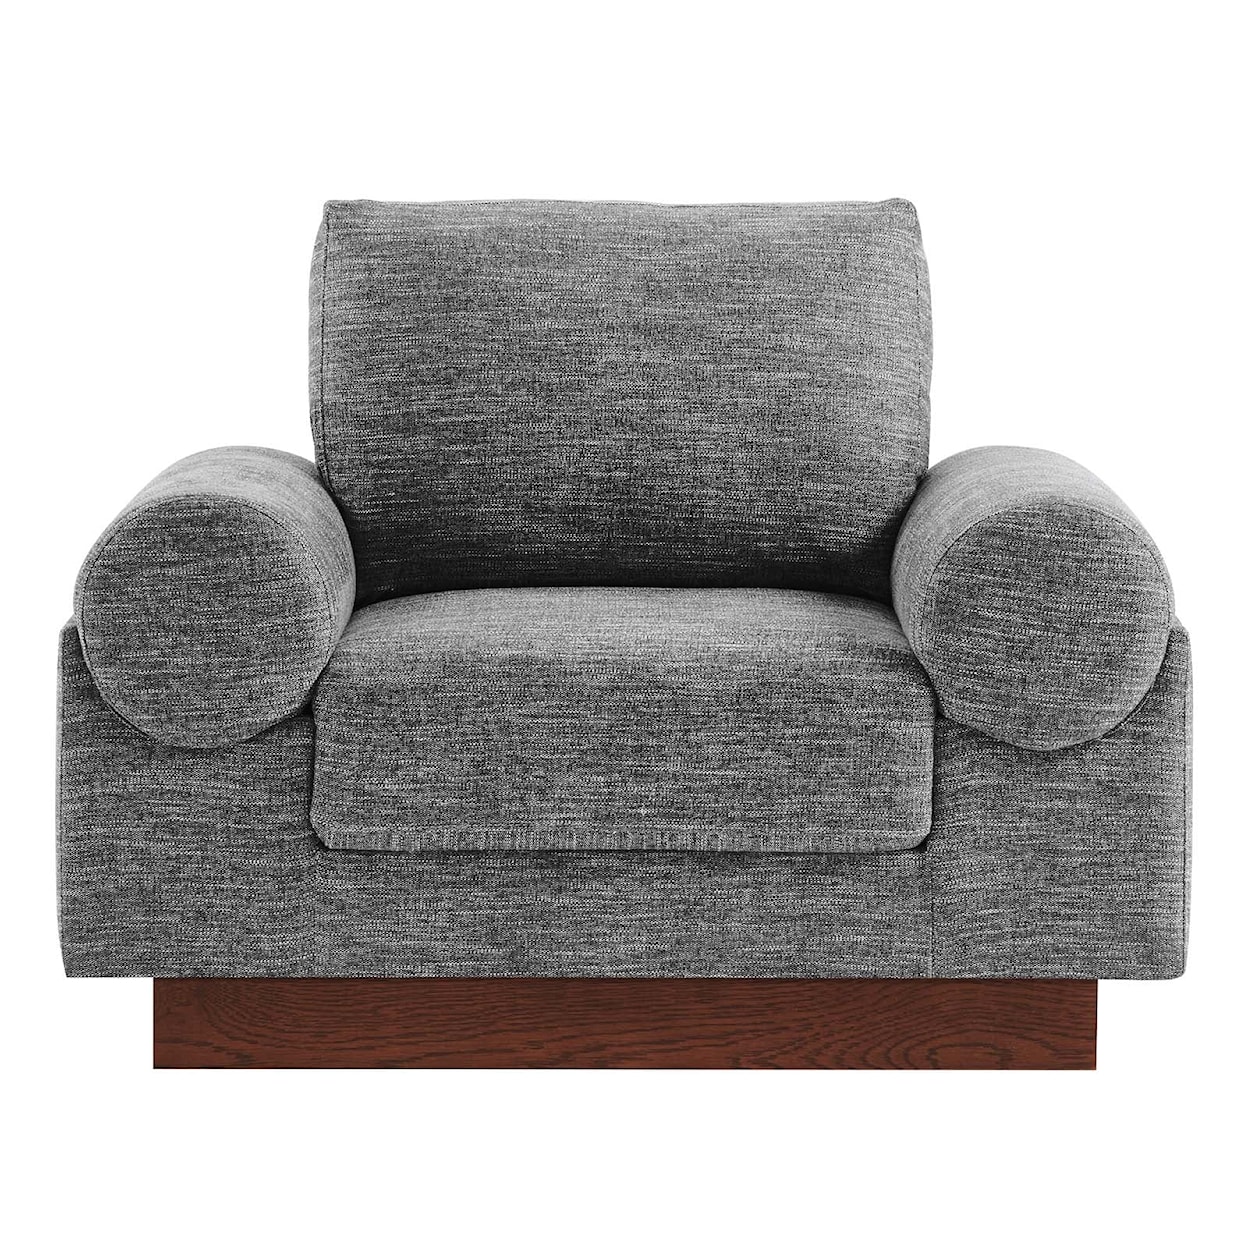 Modway Oasis Oasis Upholstered Fabric Armchair